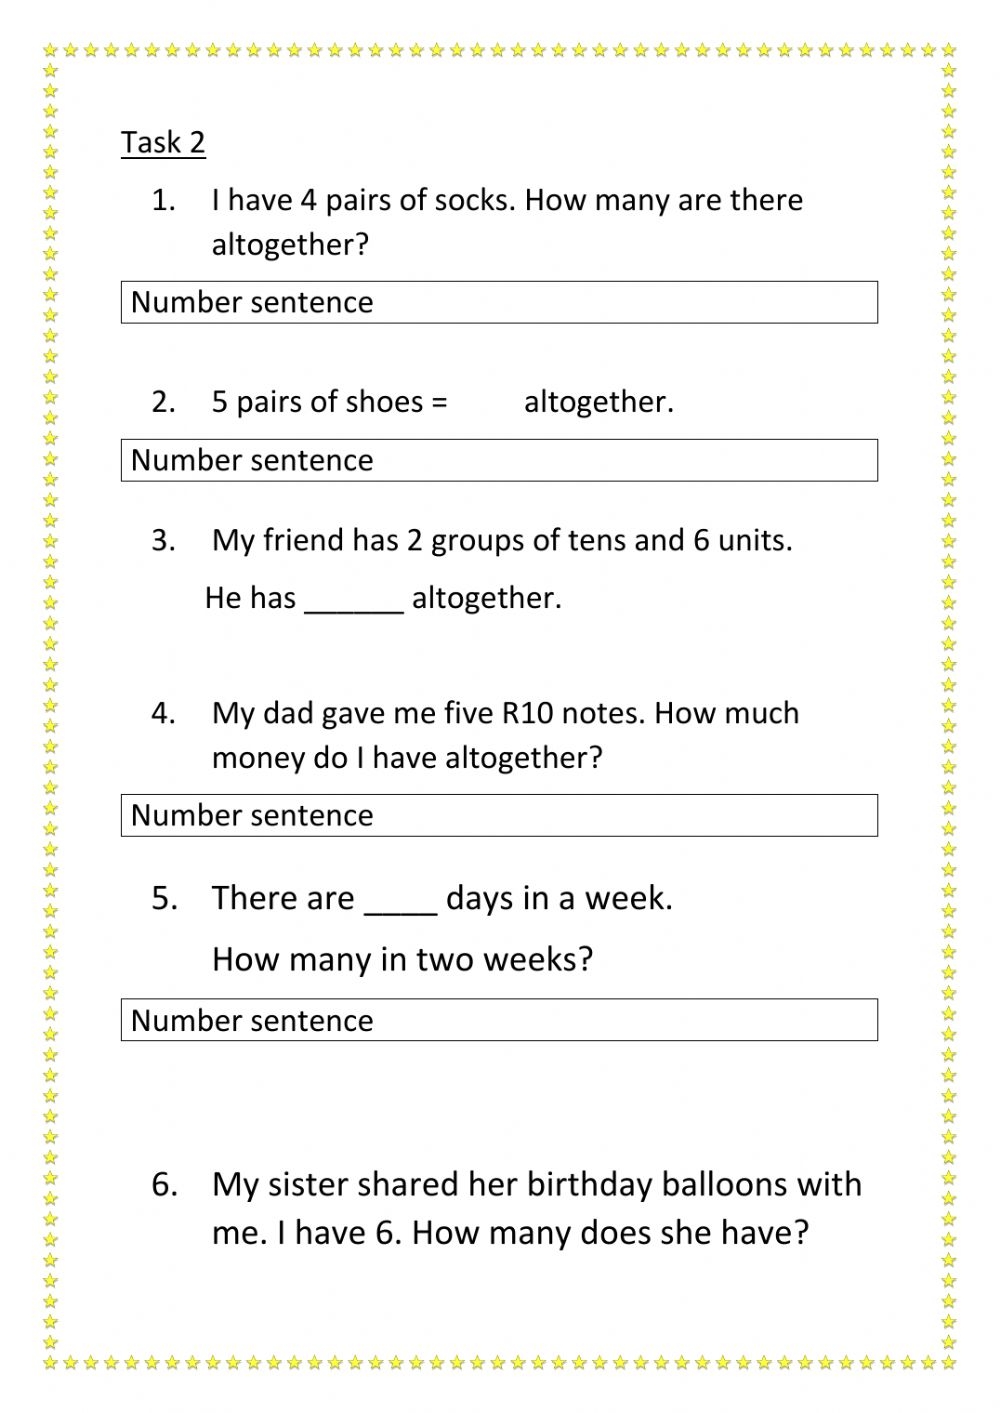 story-sums-worksheet-math-worksheet-answers